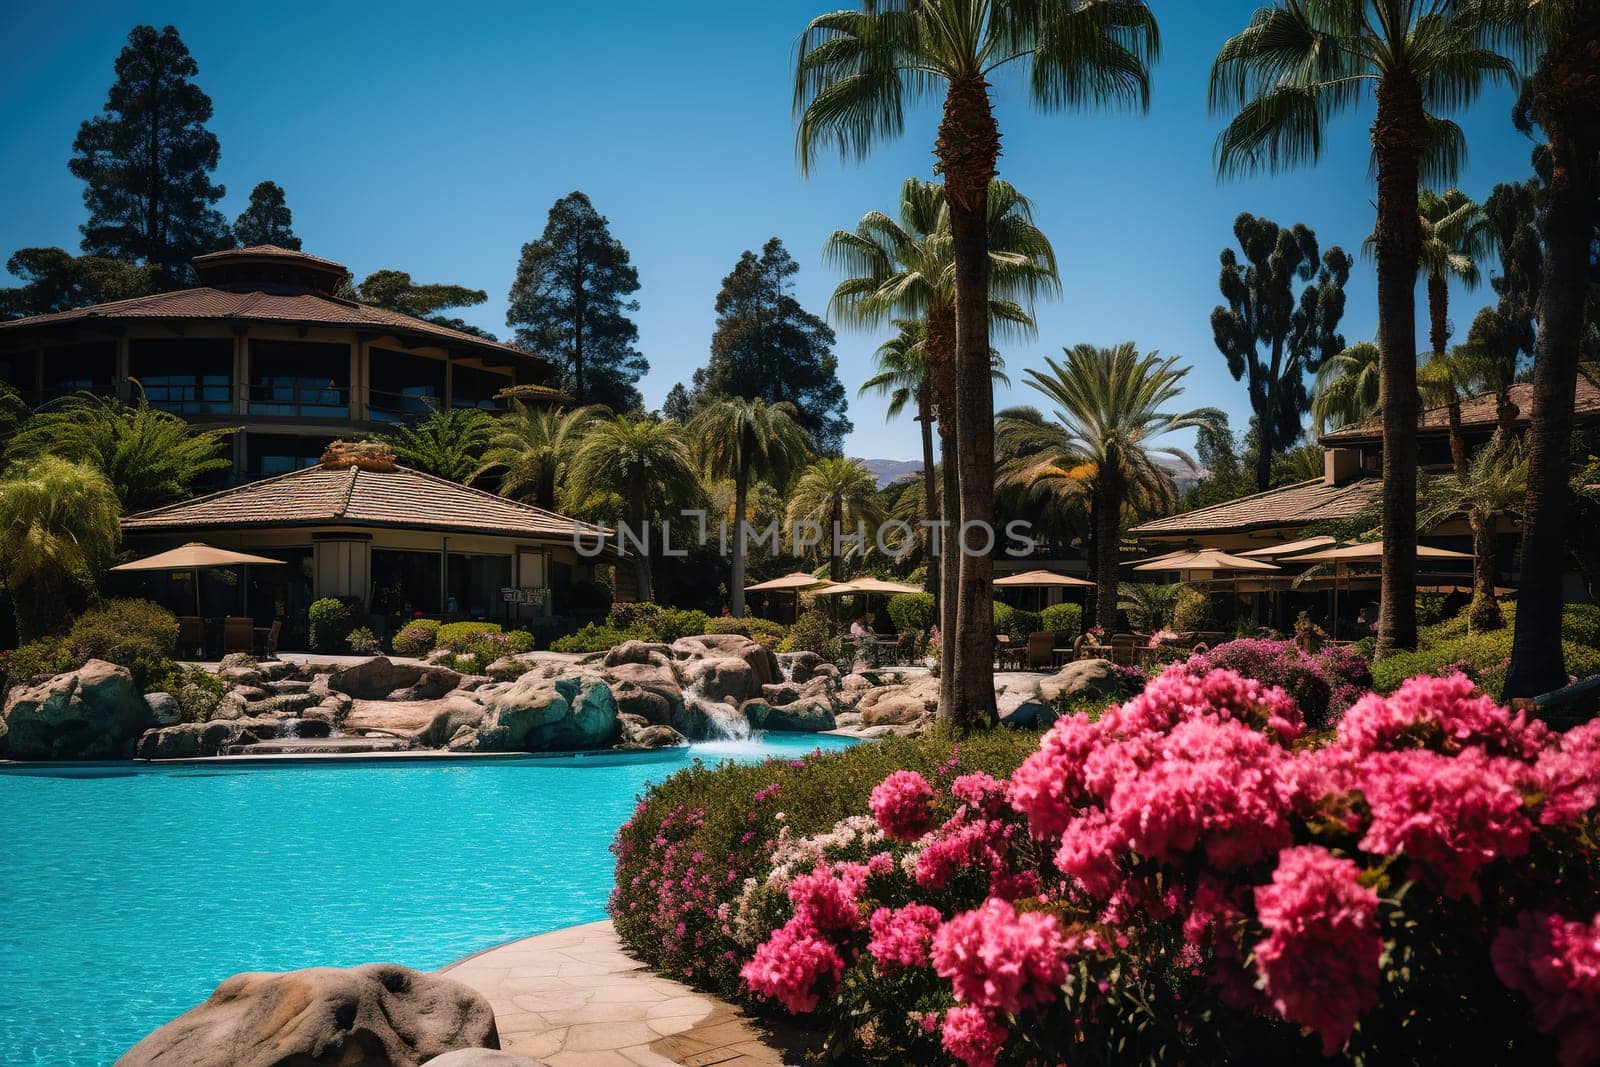 View of a beautiful hotel with a large swimming pool and pink flowers on the premises. Luxury travel vacation.